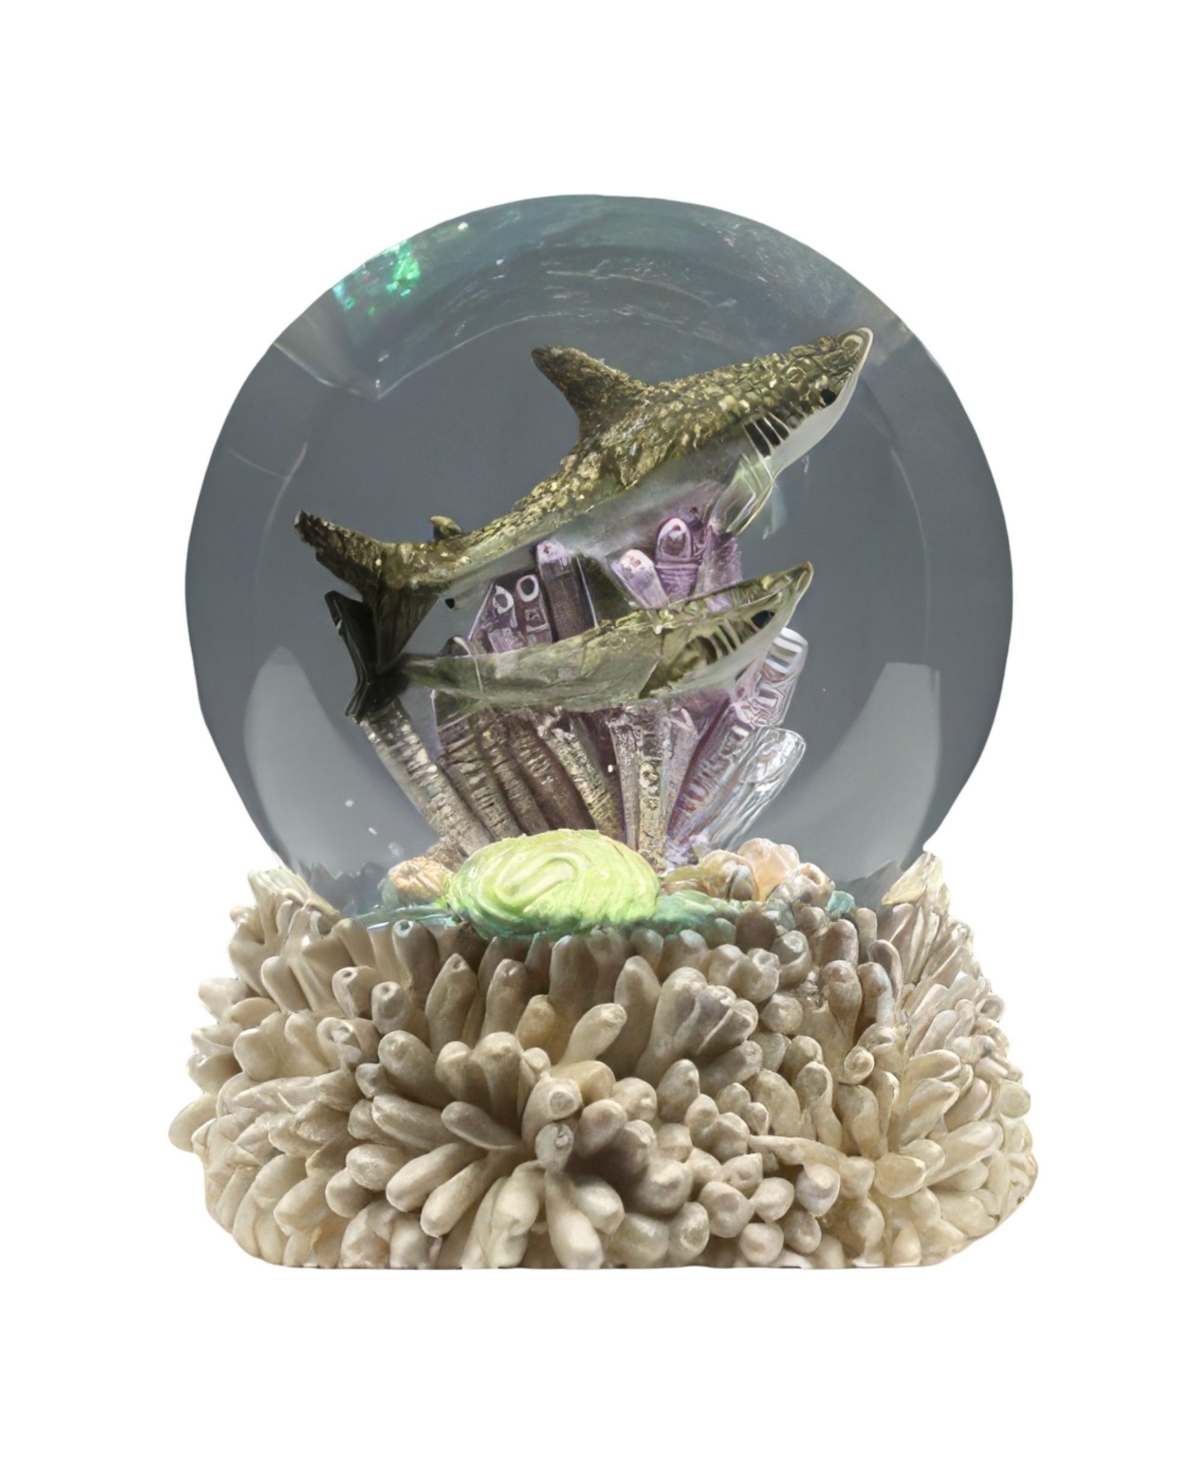 3.25"H Shark Snow Globe Home Decor Perfect Gift for House Warming, Holidays and Birthdays - Multicolor